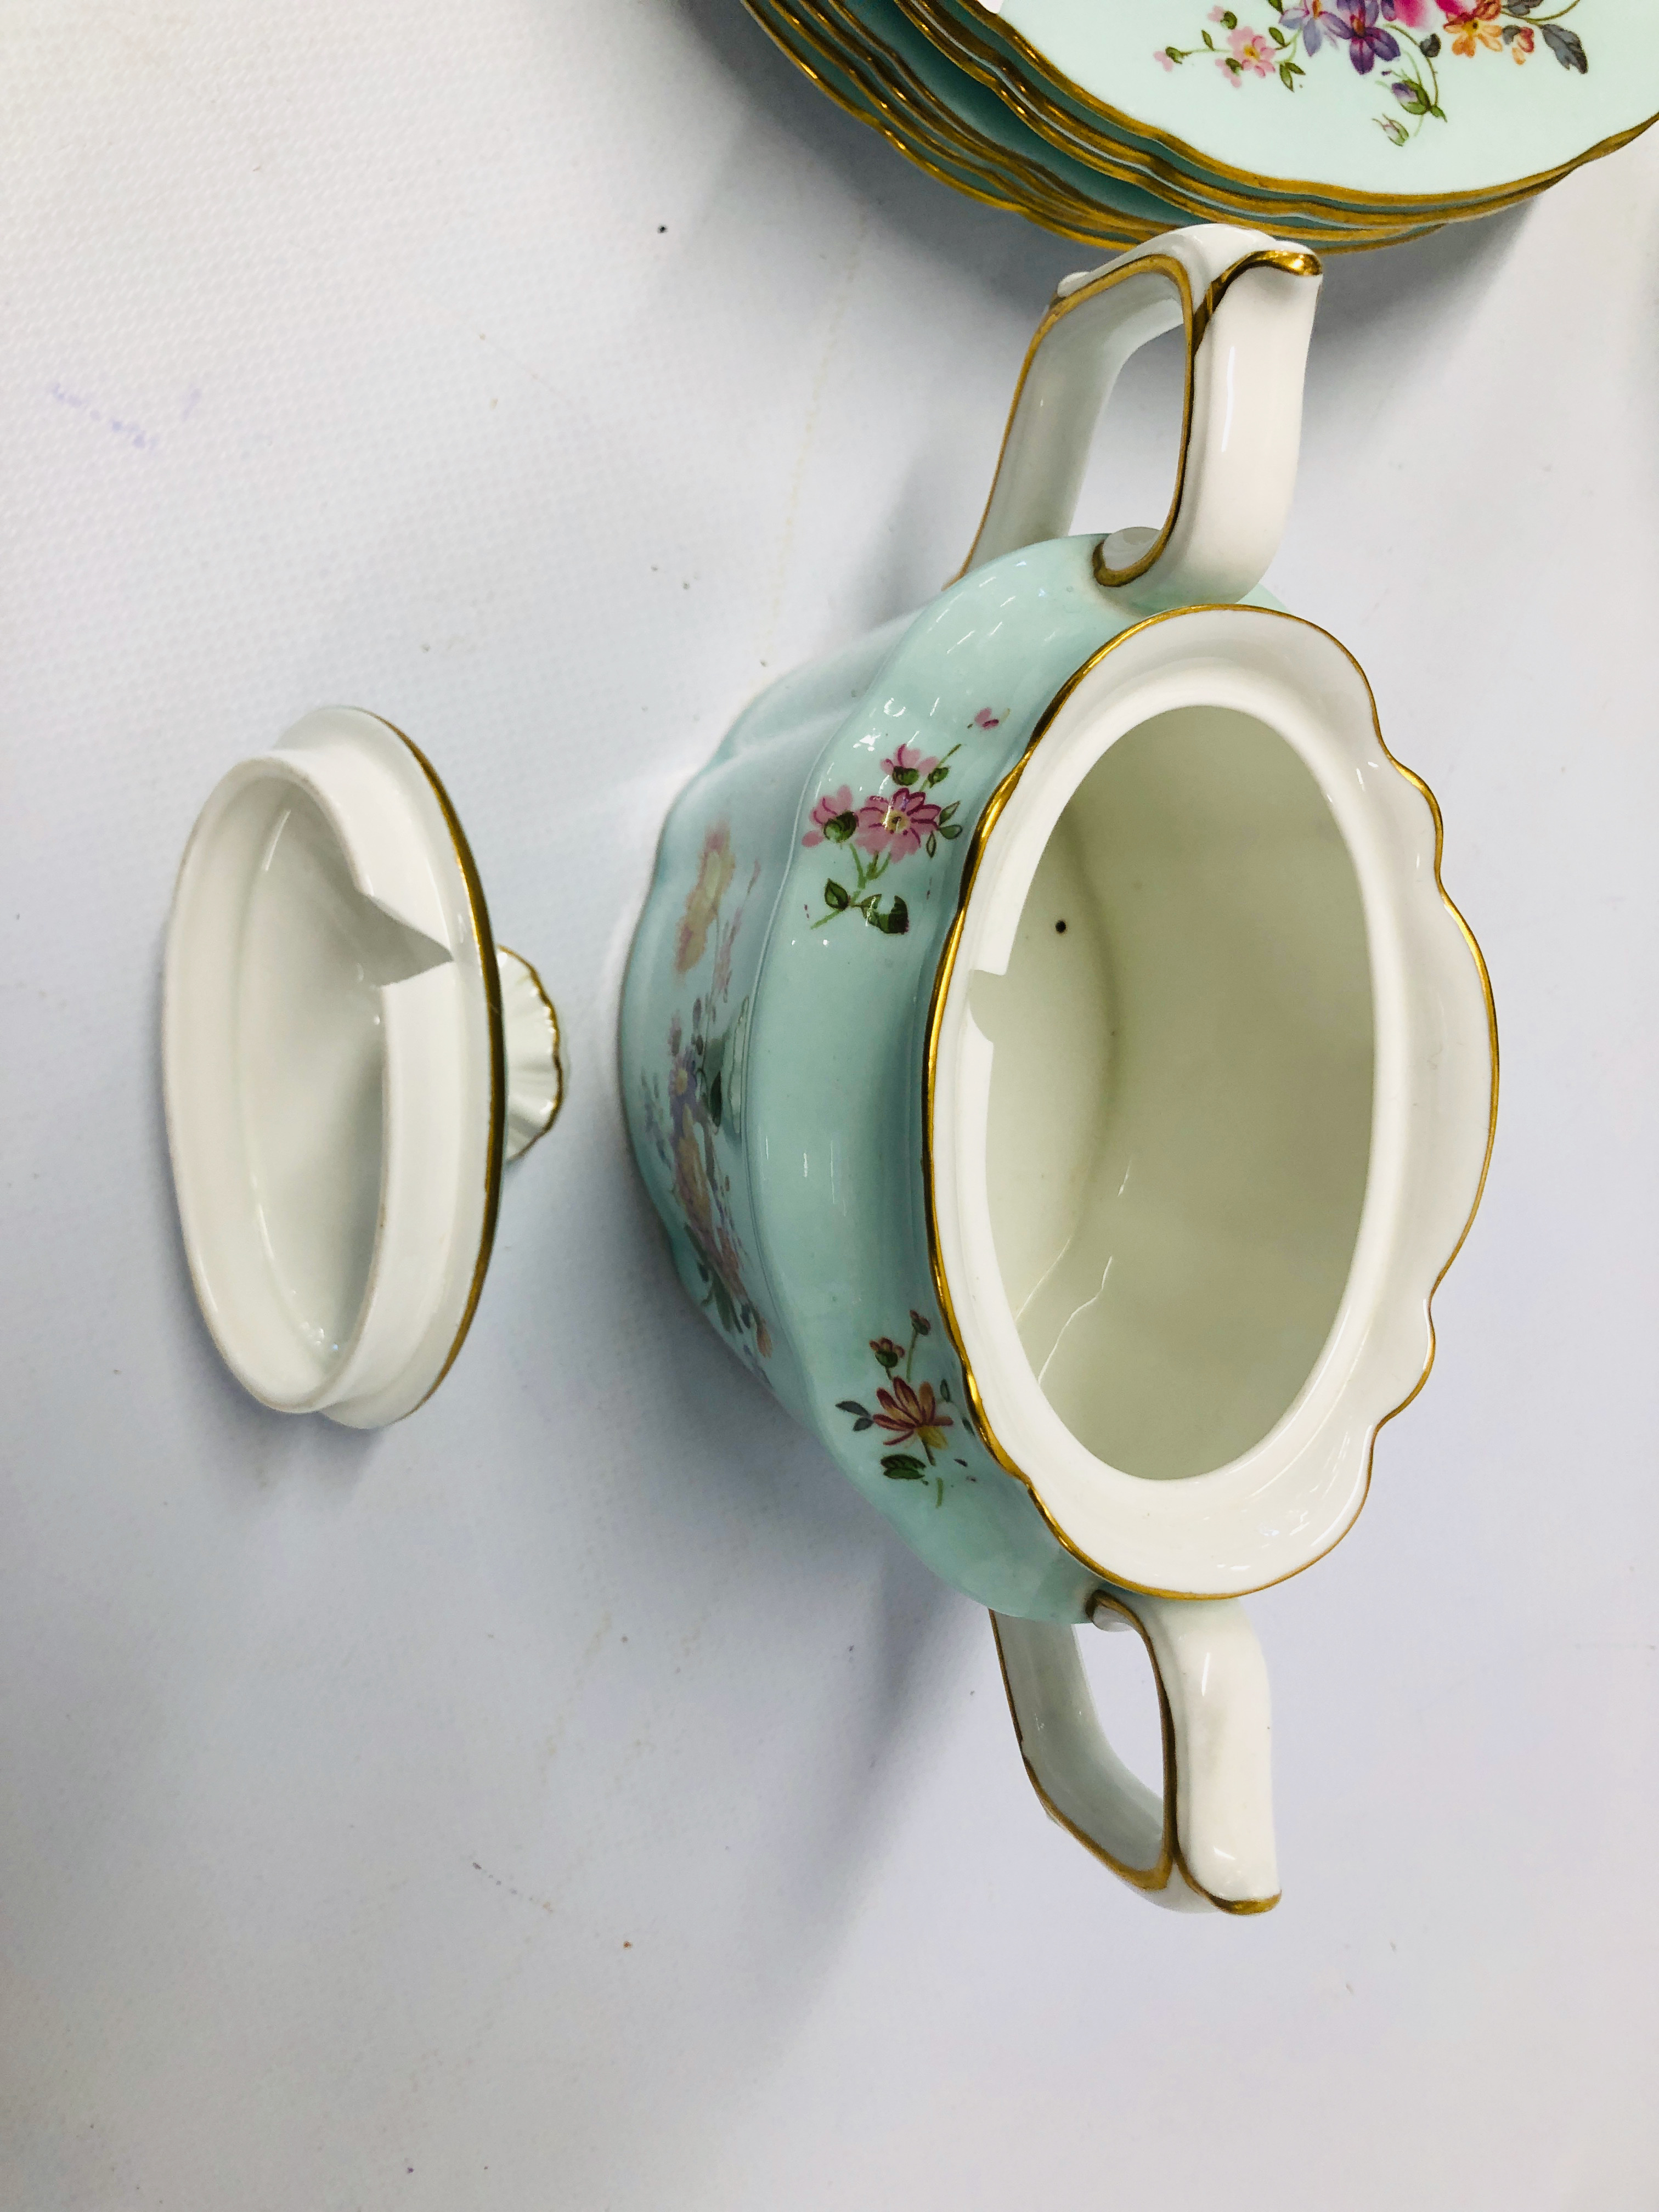 9 PIECES OF ROYAL CROWN DERBY "POSIES" (7 SIDE PLATES ONE HAVING SMALL CHIP AND SCRATCH, CREAM JUG, - Image 8 of 18